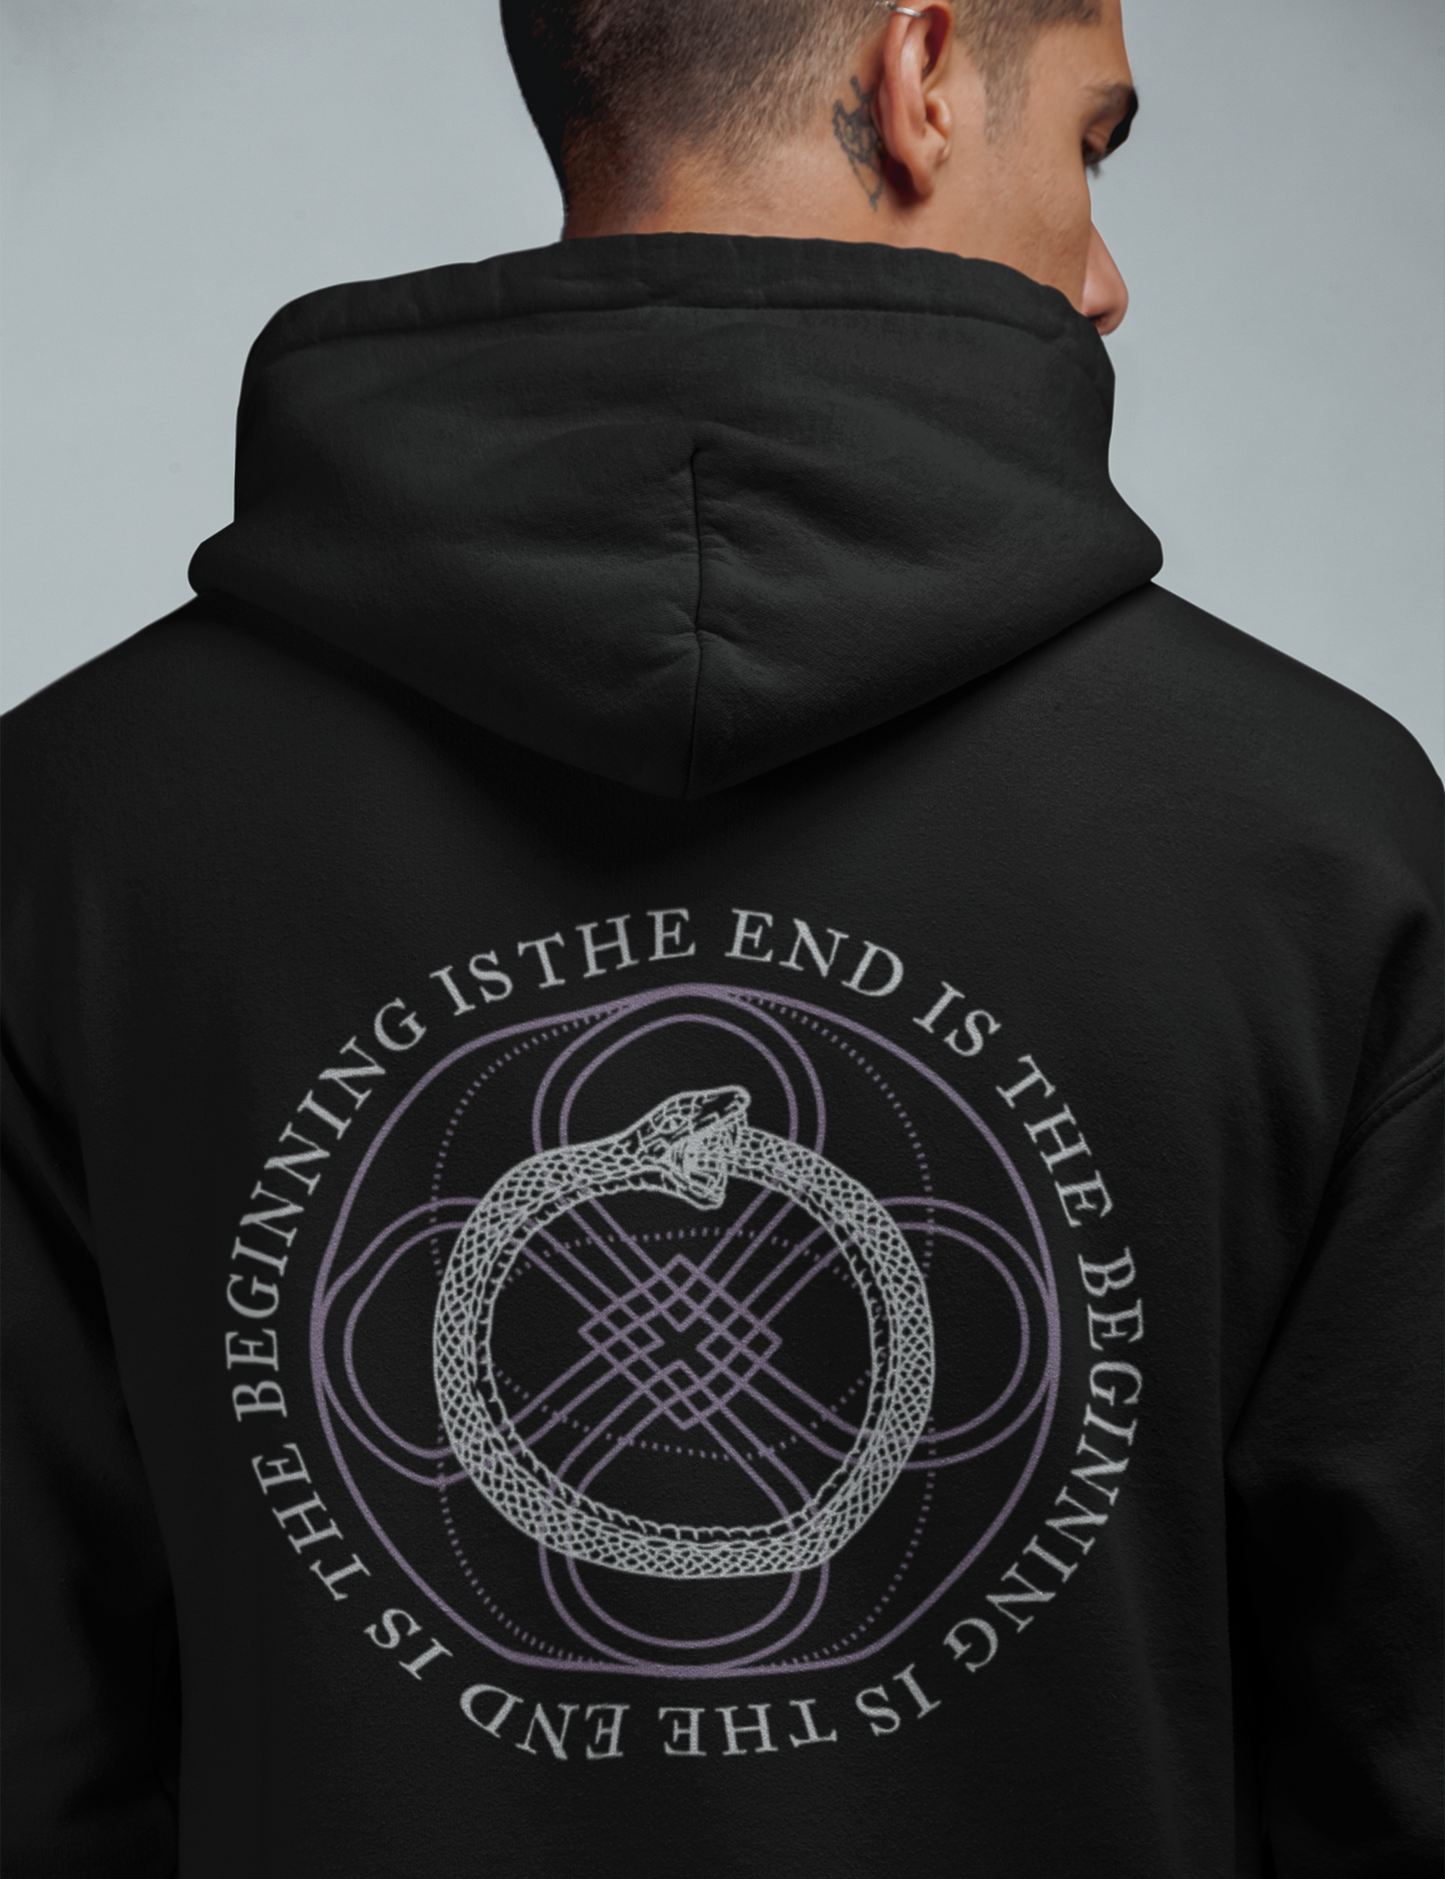 Ouroboros Esoteric Occult Alchemy Zip Up Hoodie